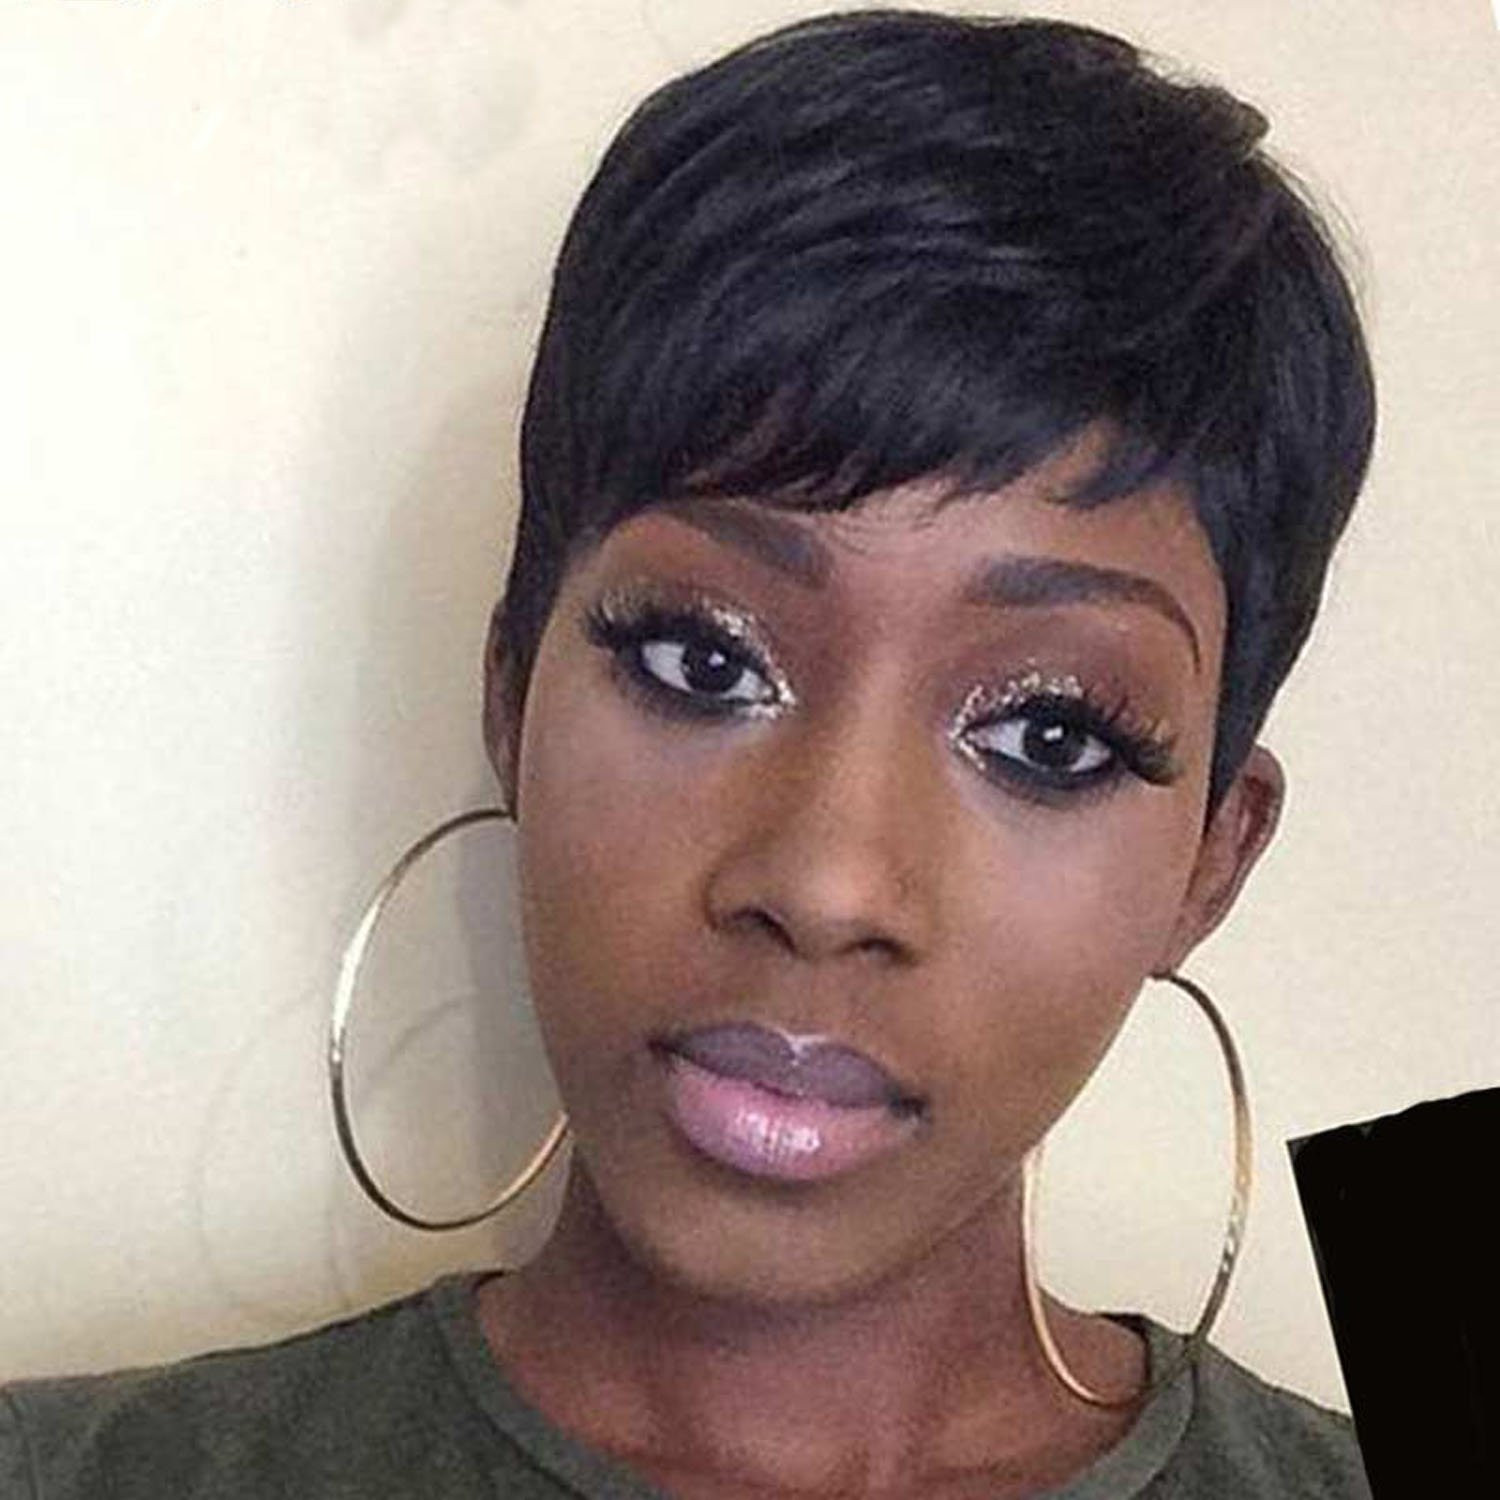 Short Black Hairstyle Wigs
 Amazon AISI HAIR Black Synthetic Wigs Short Afro